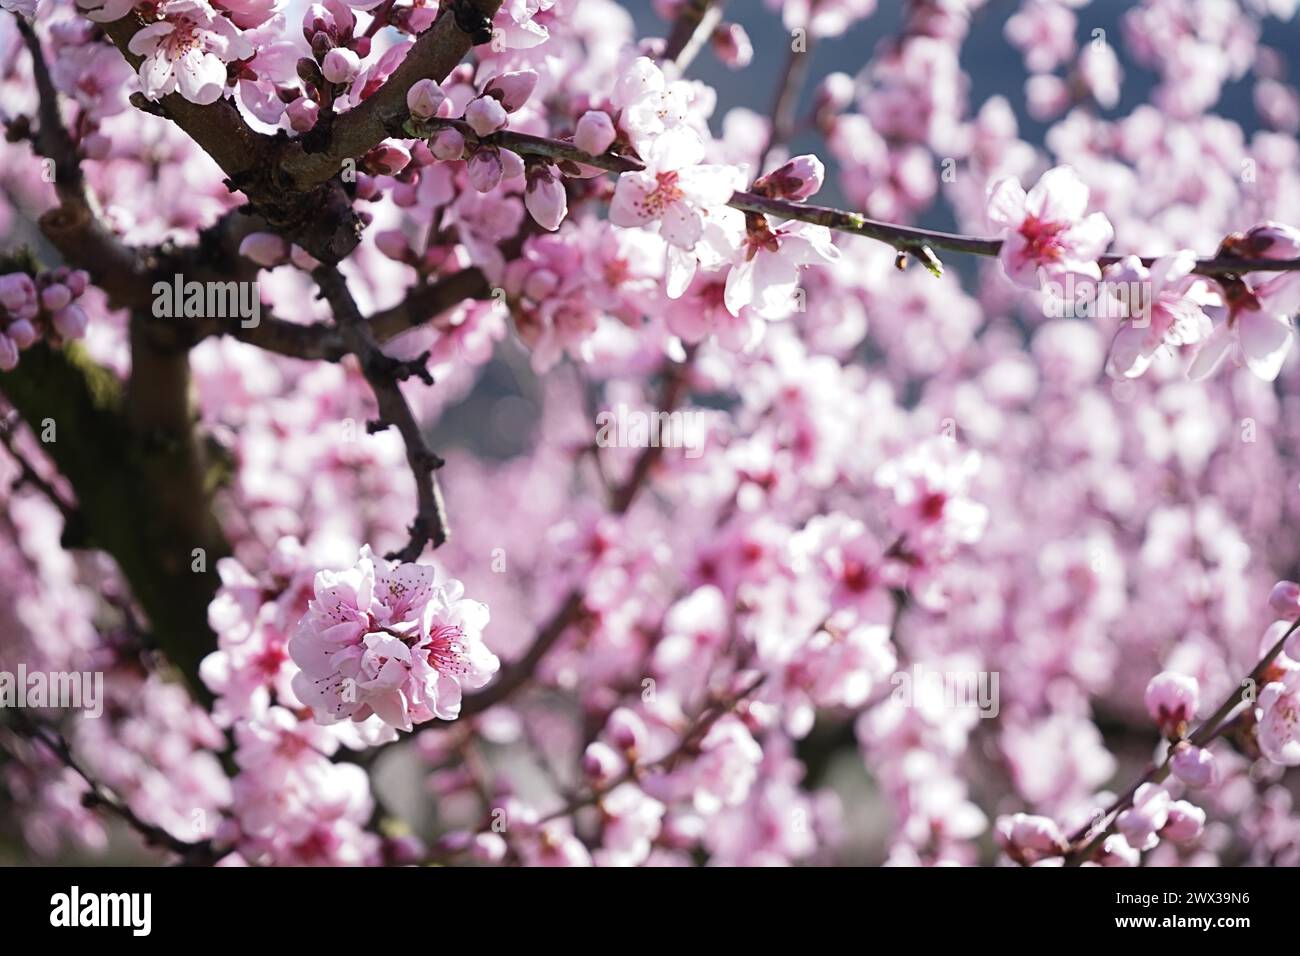 Flowering almond tree with delicate pink blossoms on a sunny spring day World Heritage Wachau Lower Austria Almond blossom Stock Photo